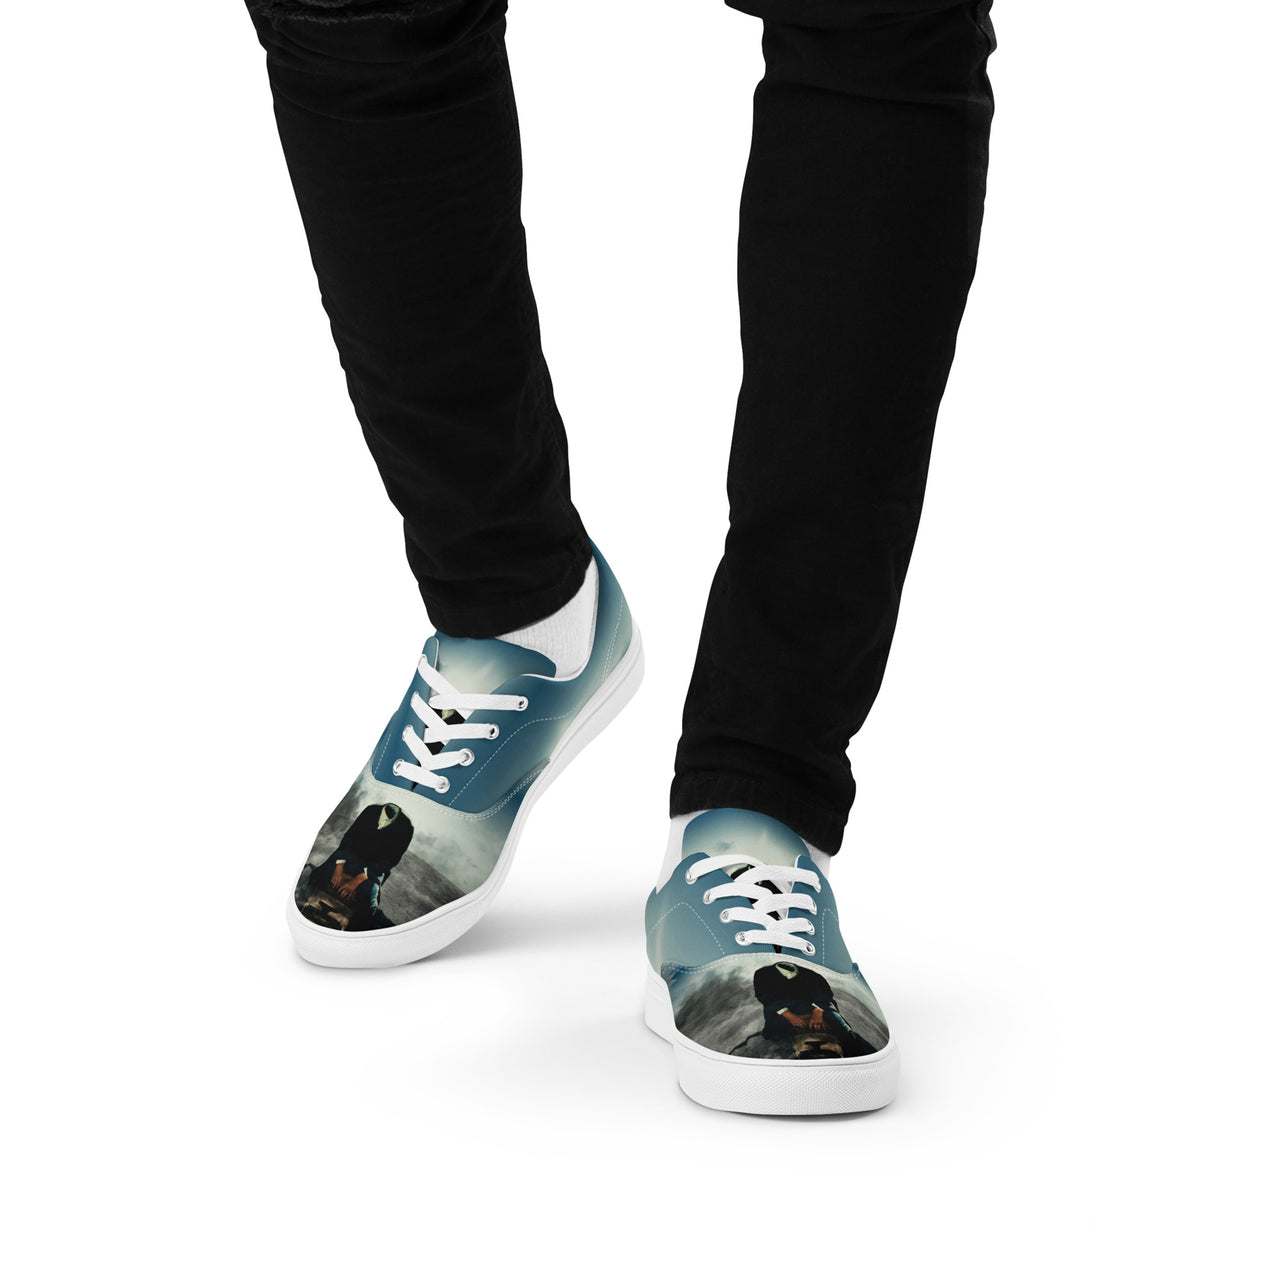 MENS SHOES - HOLLOW POET from "We Live In The Future" Special Edition Shoes Men’s lace-up canvas shoes